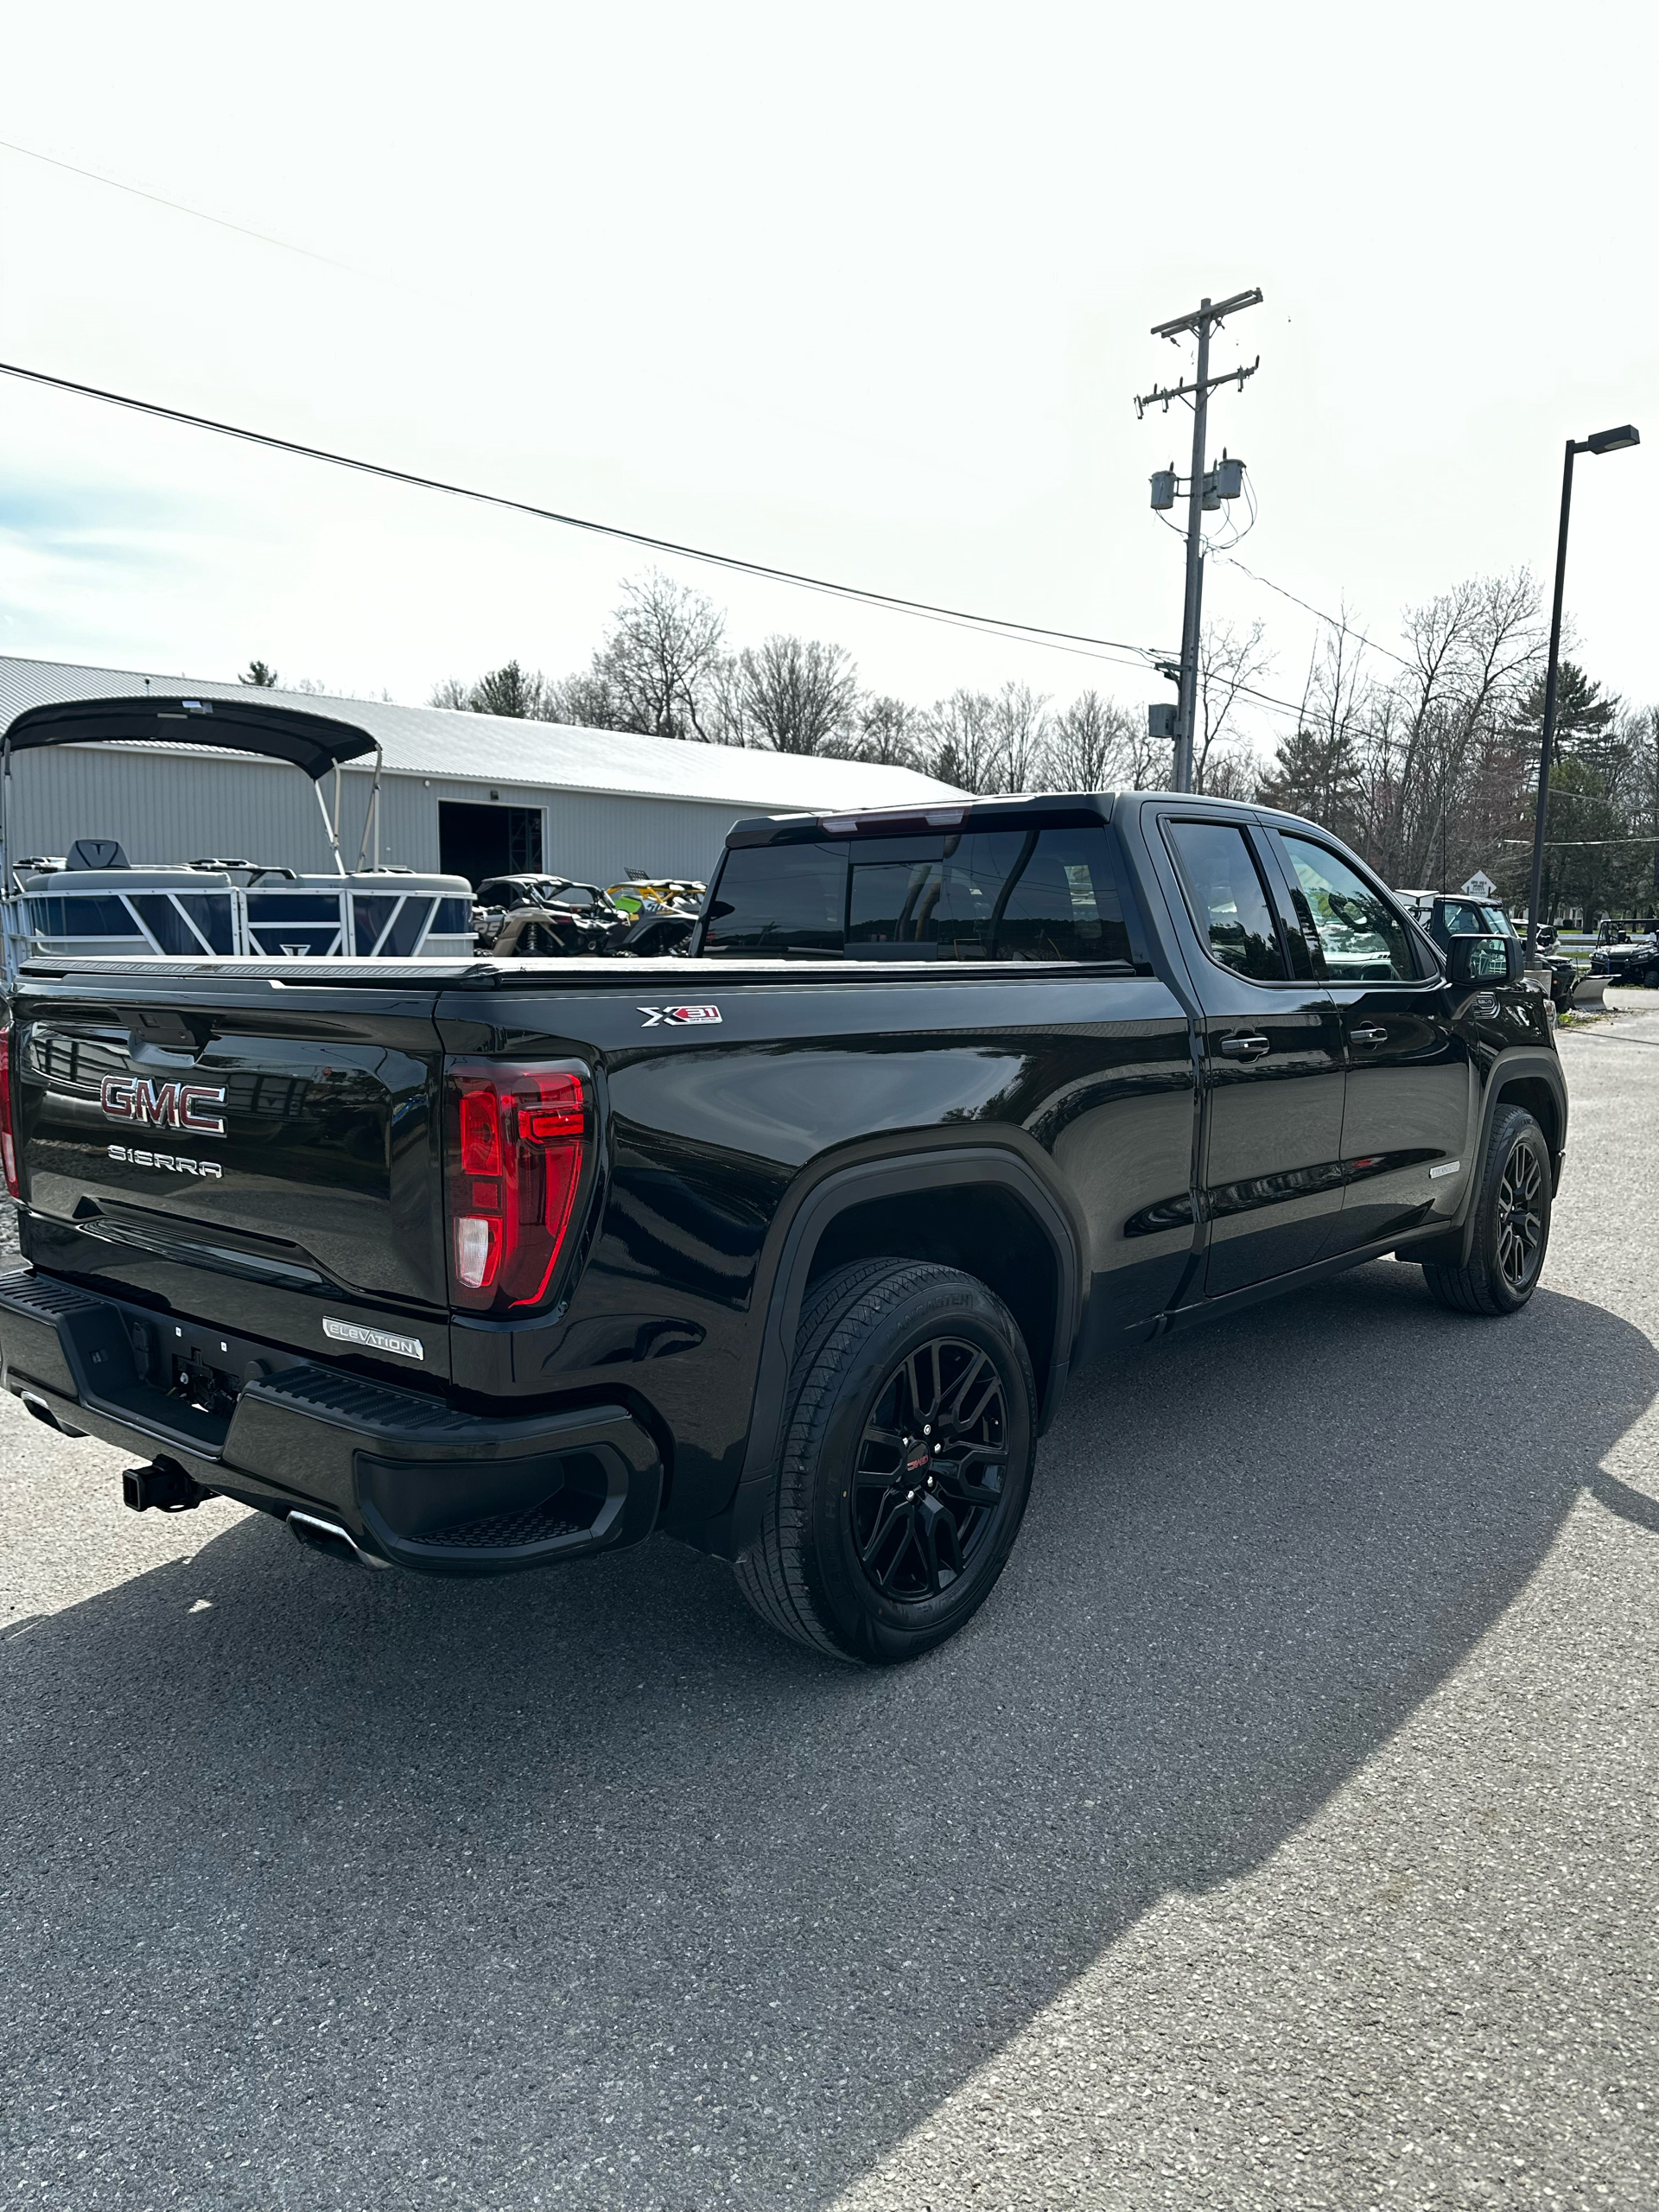 2020 Other SIERRA 1500 ELEVATION DOUBLE CAB in Gaylord, Michigan - Photo 4